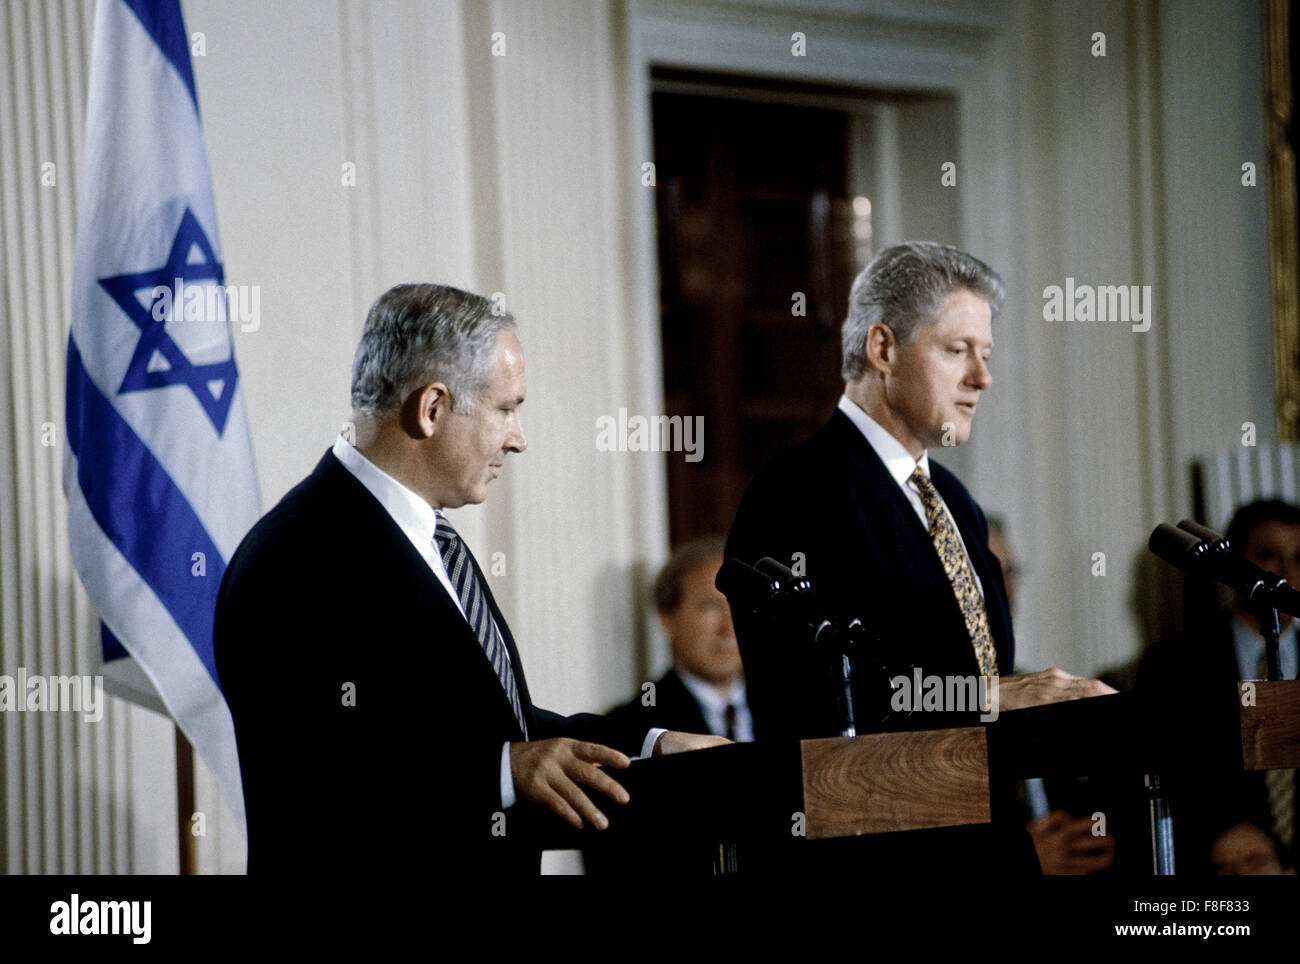 Washington, DC. USA, 9th July 1996  Israeli Prime Minister Benjamin Netanyahu is joined at the podium by President William Clinton during a formal joint news conference in the East Room of the White House.  Benjamin 'Bibi' Netanyahu is the current Prime Minister of Israel. He also currently serves as a member of the Knesset and Chairman of the Likud party. Born in Tel Aviv to secular Jewish parents, Netanyahu is the first Israeli prime minister born in Israel after the establishment of the state. Credit: Mark Reinstein Stock Photo